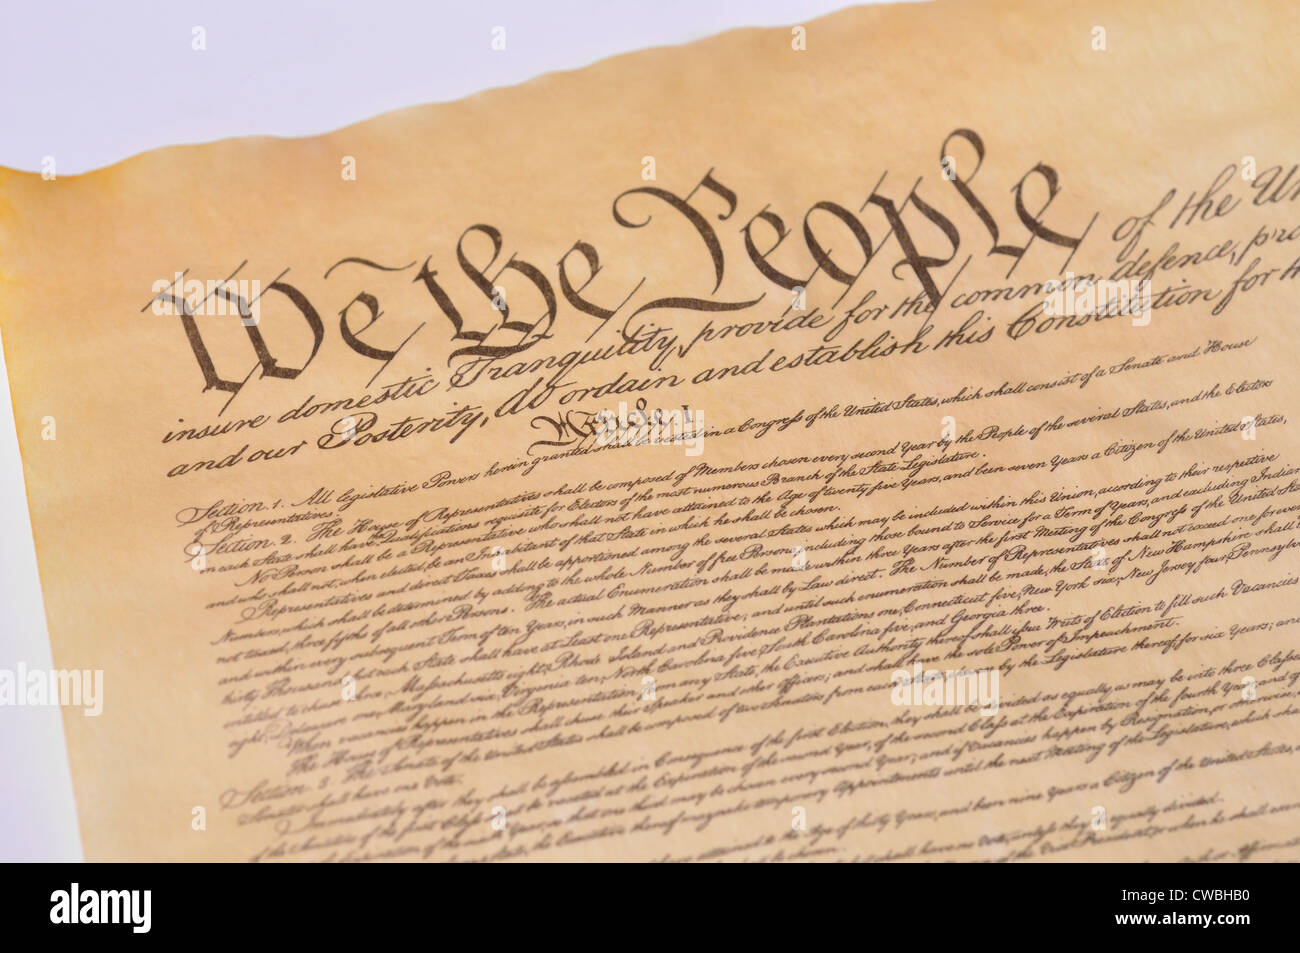 'We the People' on the Constitution of the United States of America Stock Photo